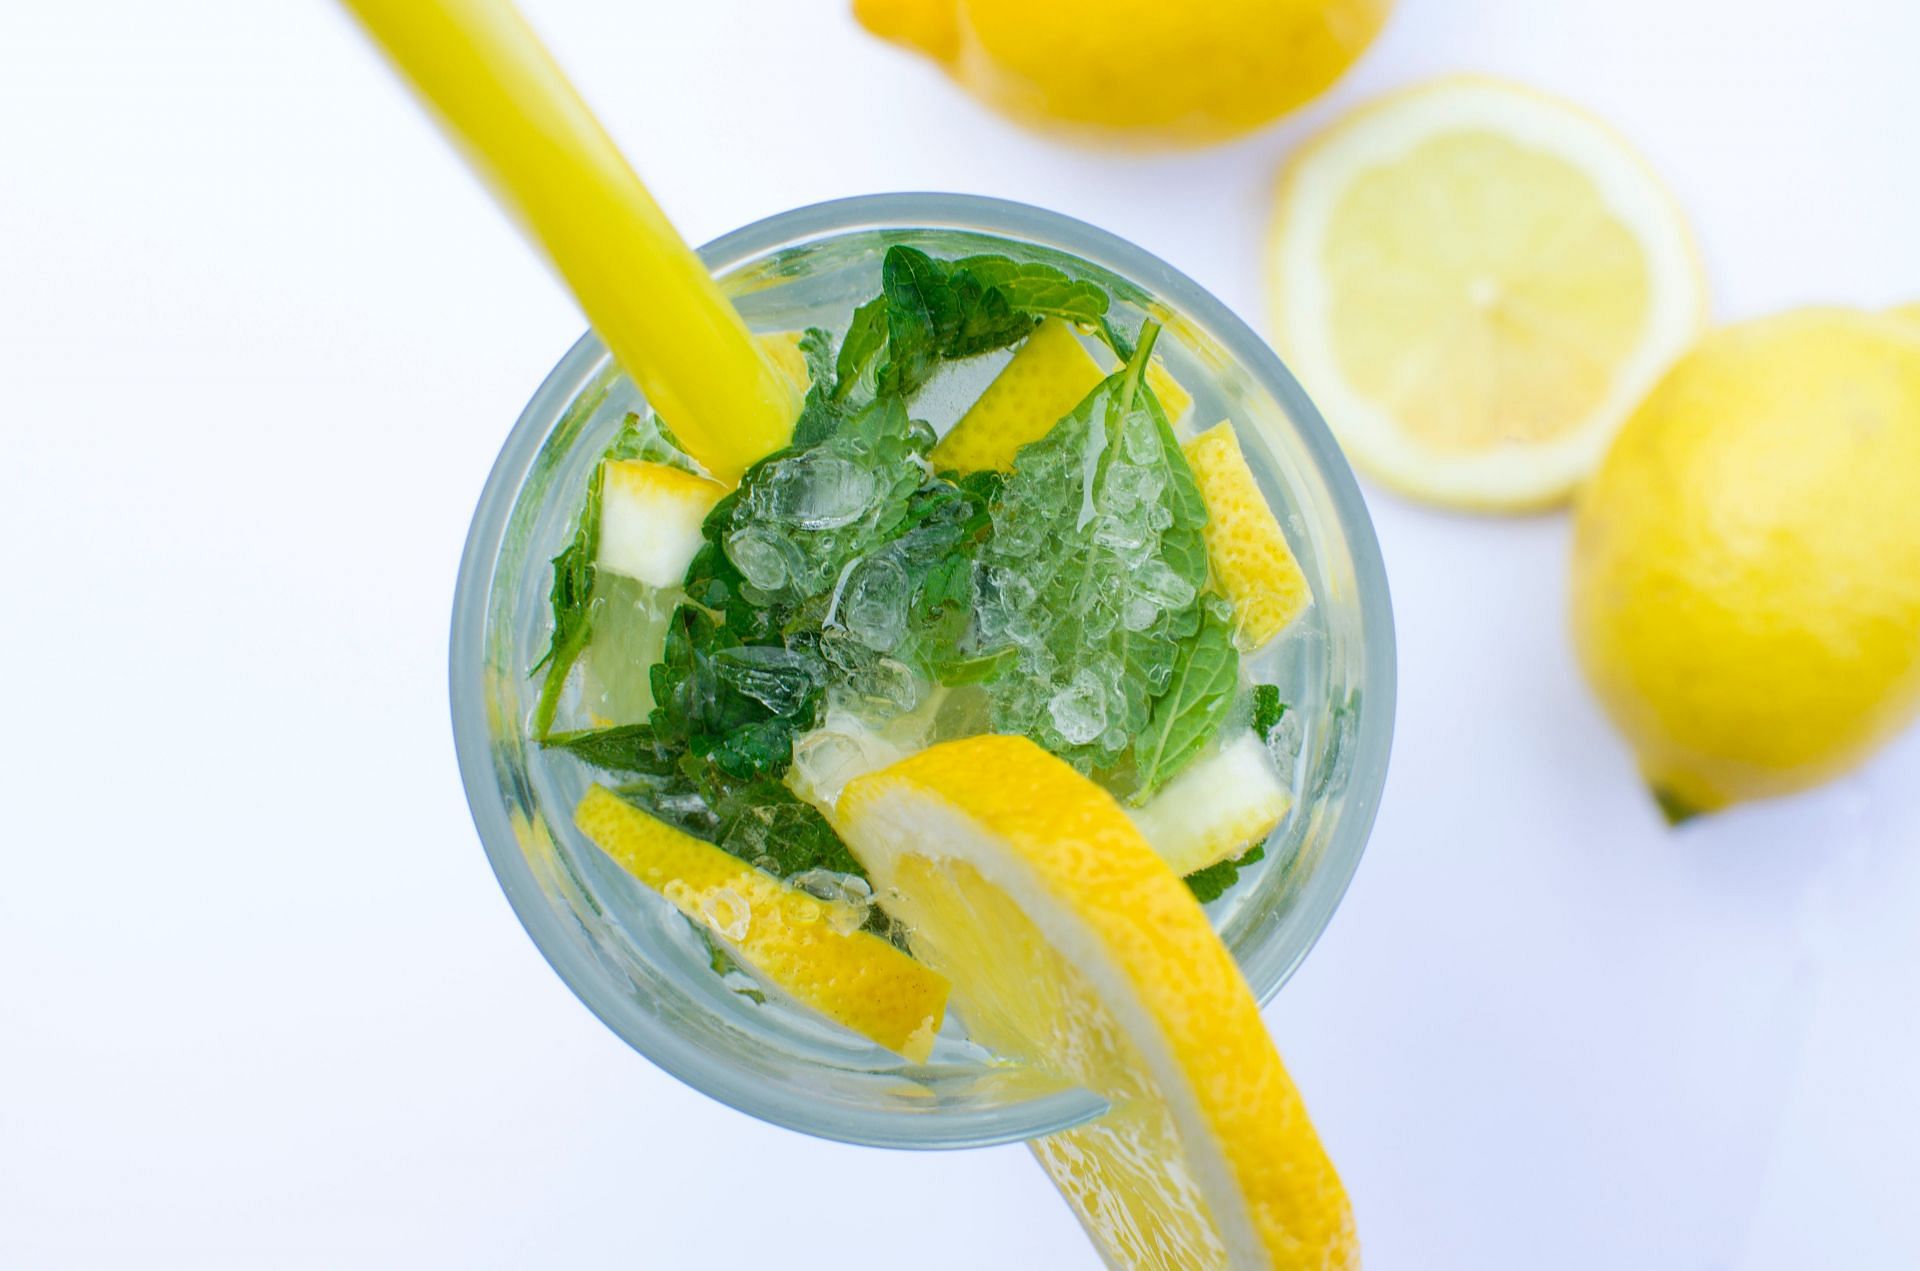 Importance of lemon and hot water for constipation (image sourced via Pexels / Photo by Lukas)